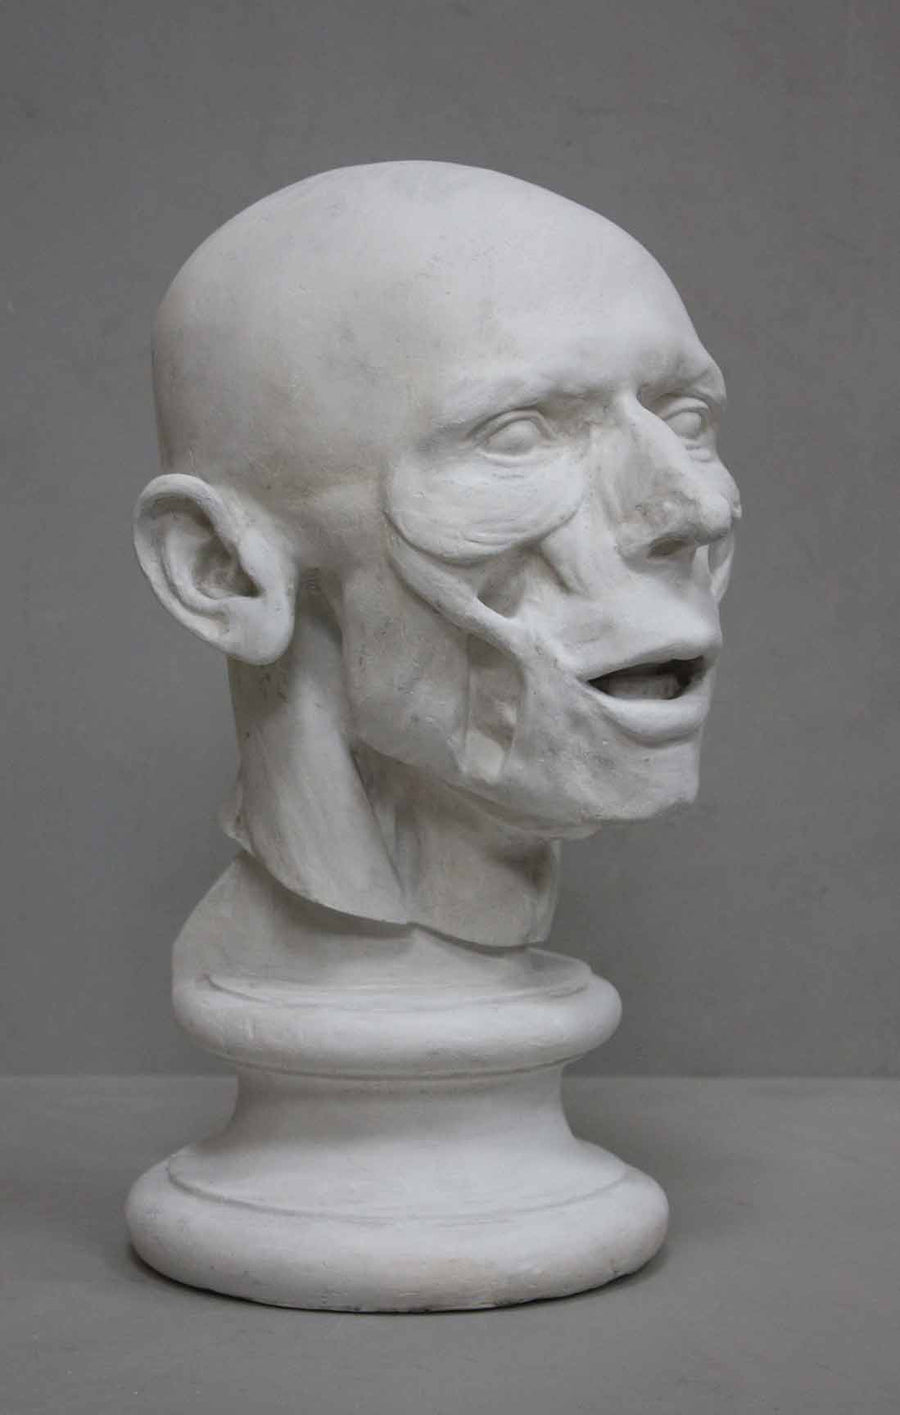 photo of plaster cast anatomical sculpture of man's head on socle base with a gray background